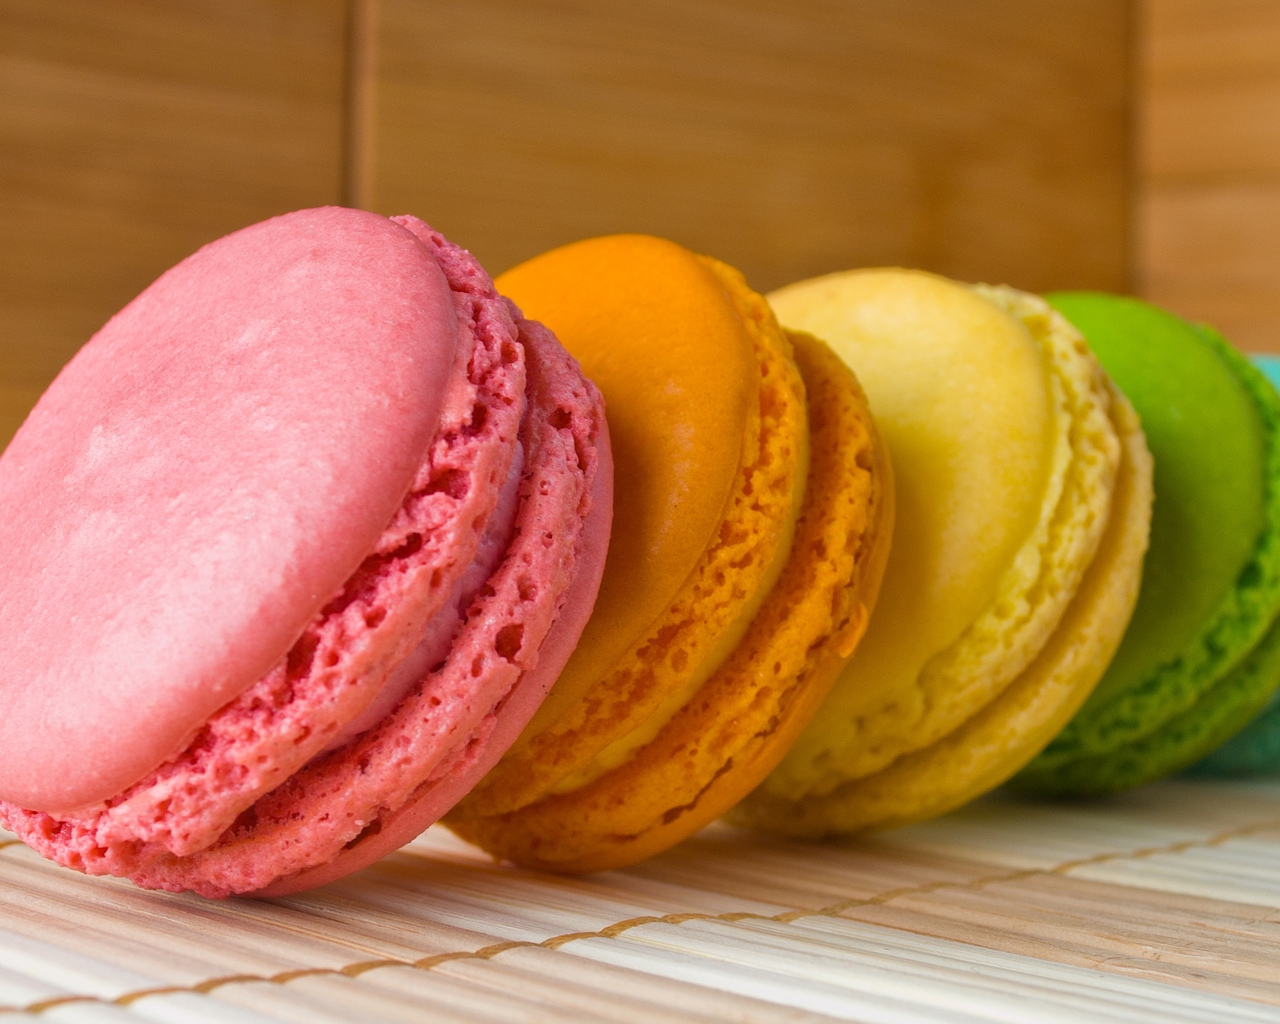 Colourful Macaroons for 1280 x 1024 resolution